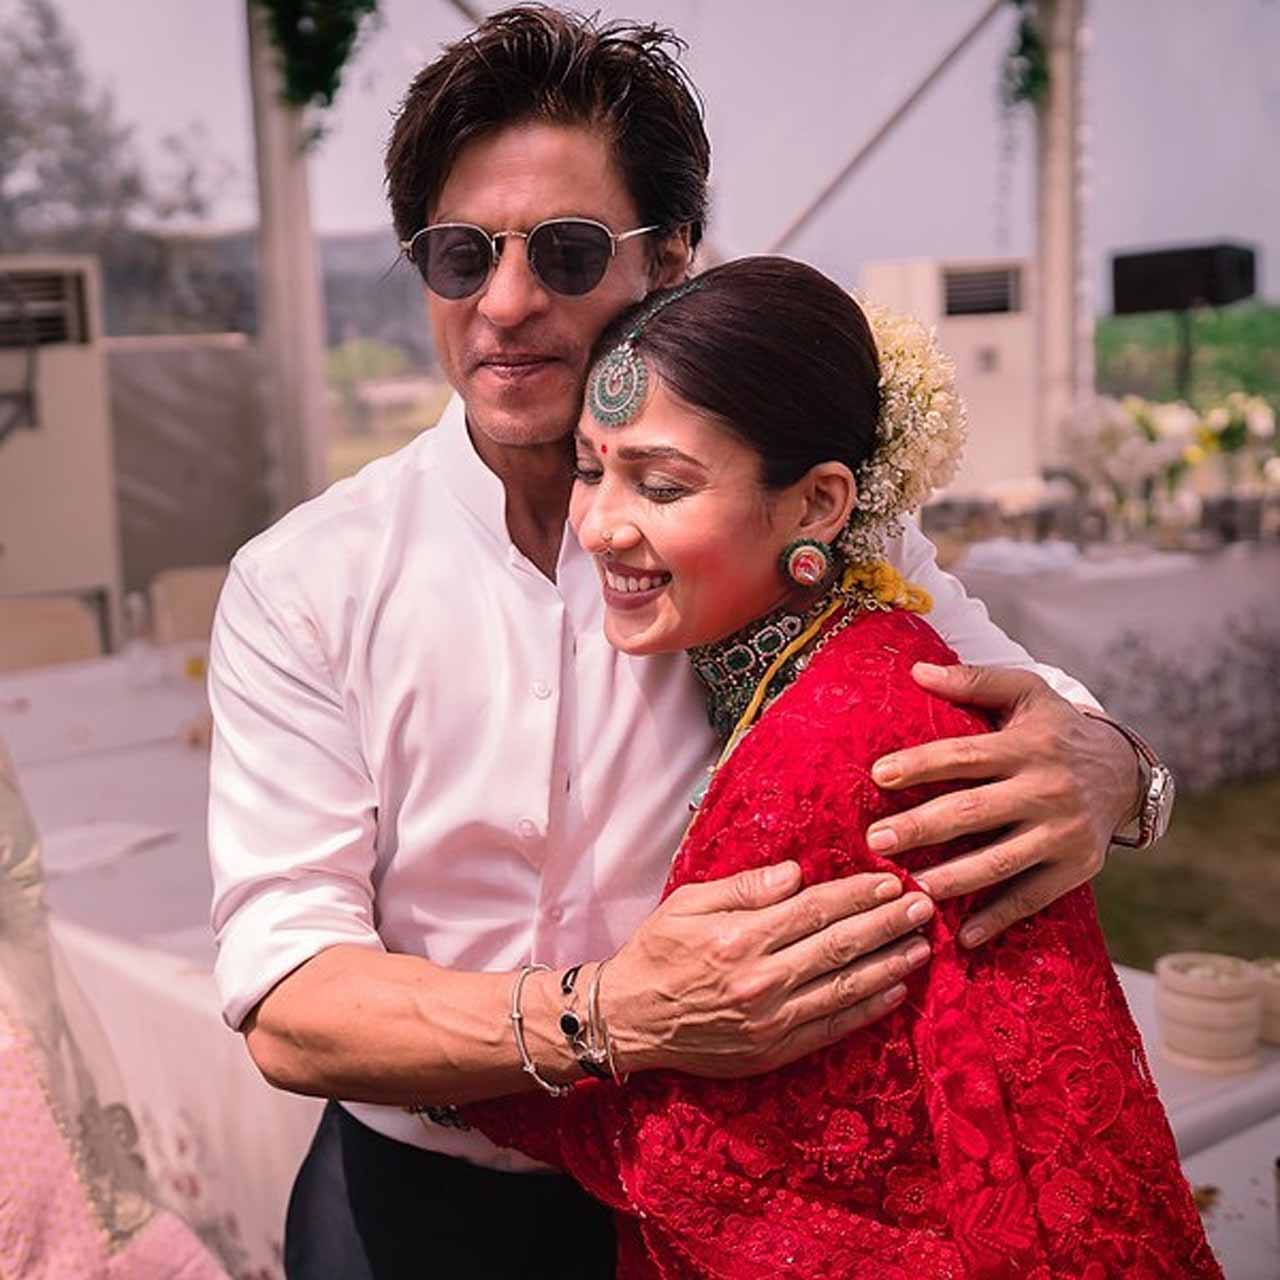 Nayanthara will soon be making her Bollywood debut with the upcoming film Jawan. The film also stars Shah Rukh Khan in the lead. Her Jawan co-star and director Atlee were also present at the wedding. Vignesh shared a picture of Khan hugging Nayanthara after the wedding ceremony. 